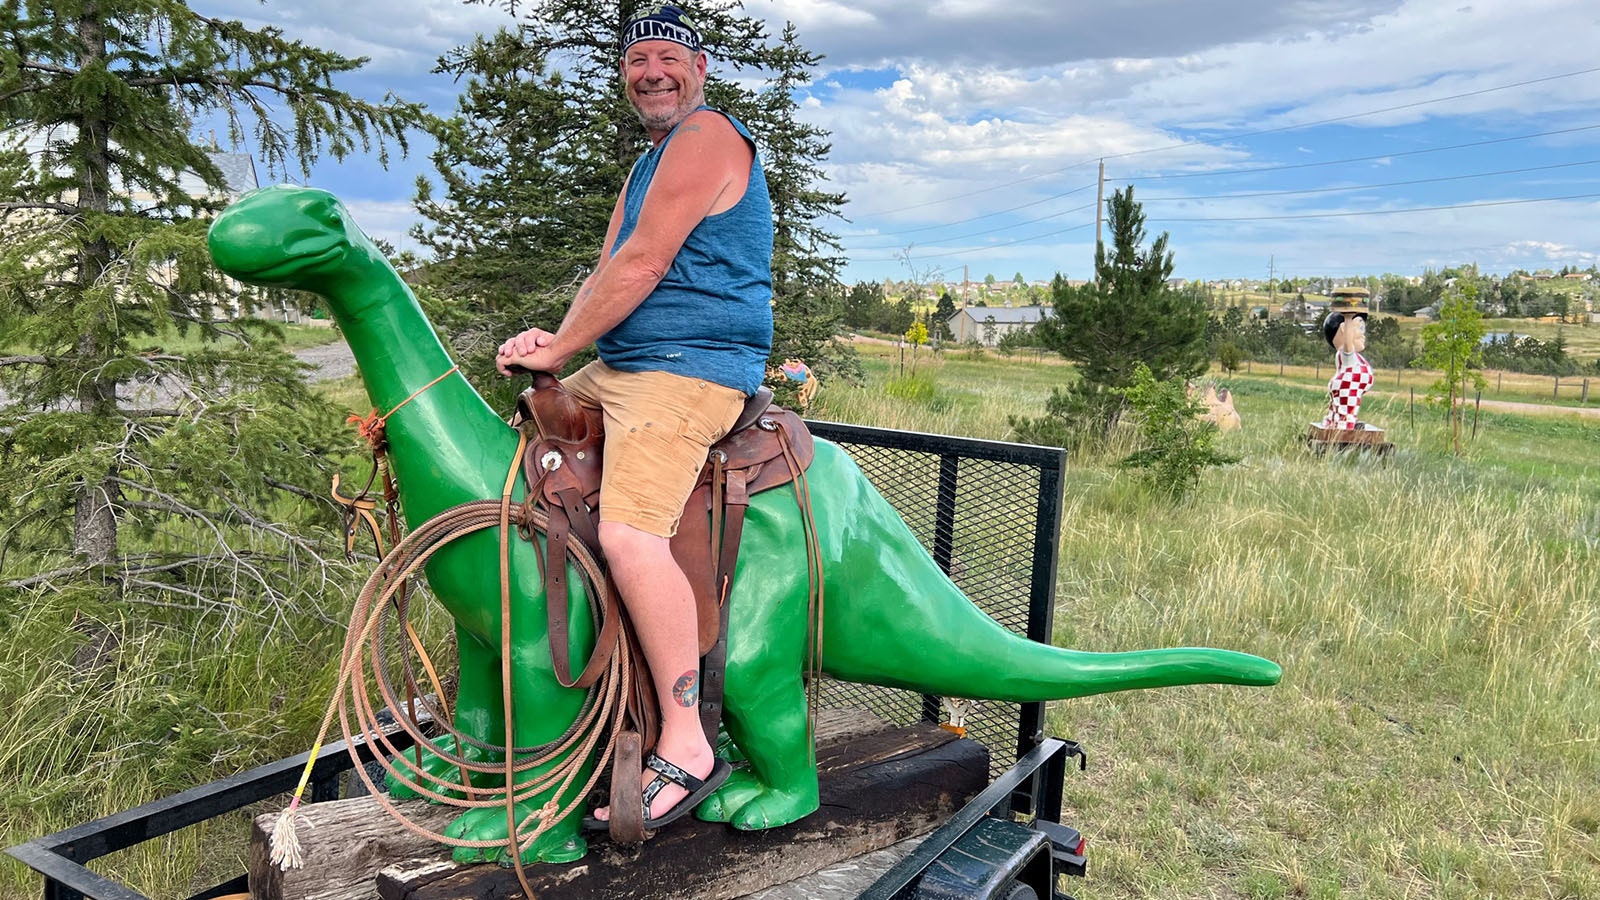 Stuart Flynn lets kids sit in the saddle of his Sinclair dinosaur, Dino.